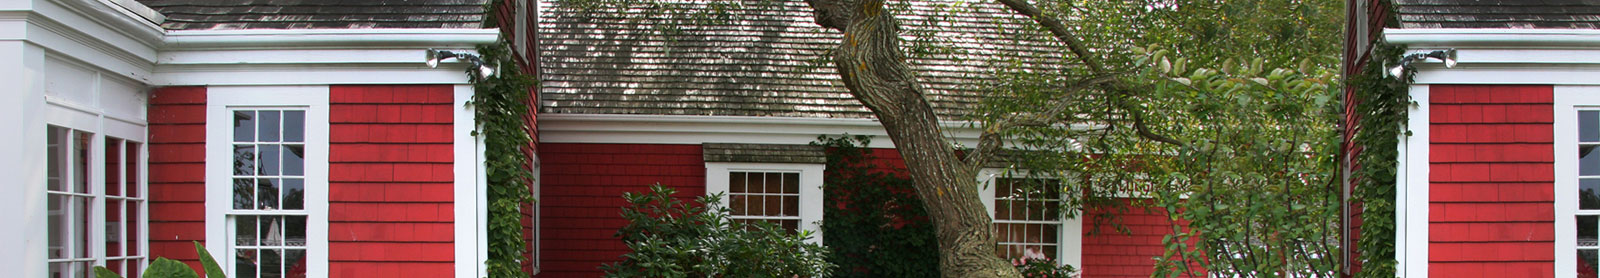 Cropped photo of red house with white trim